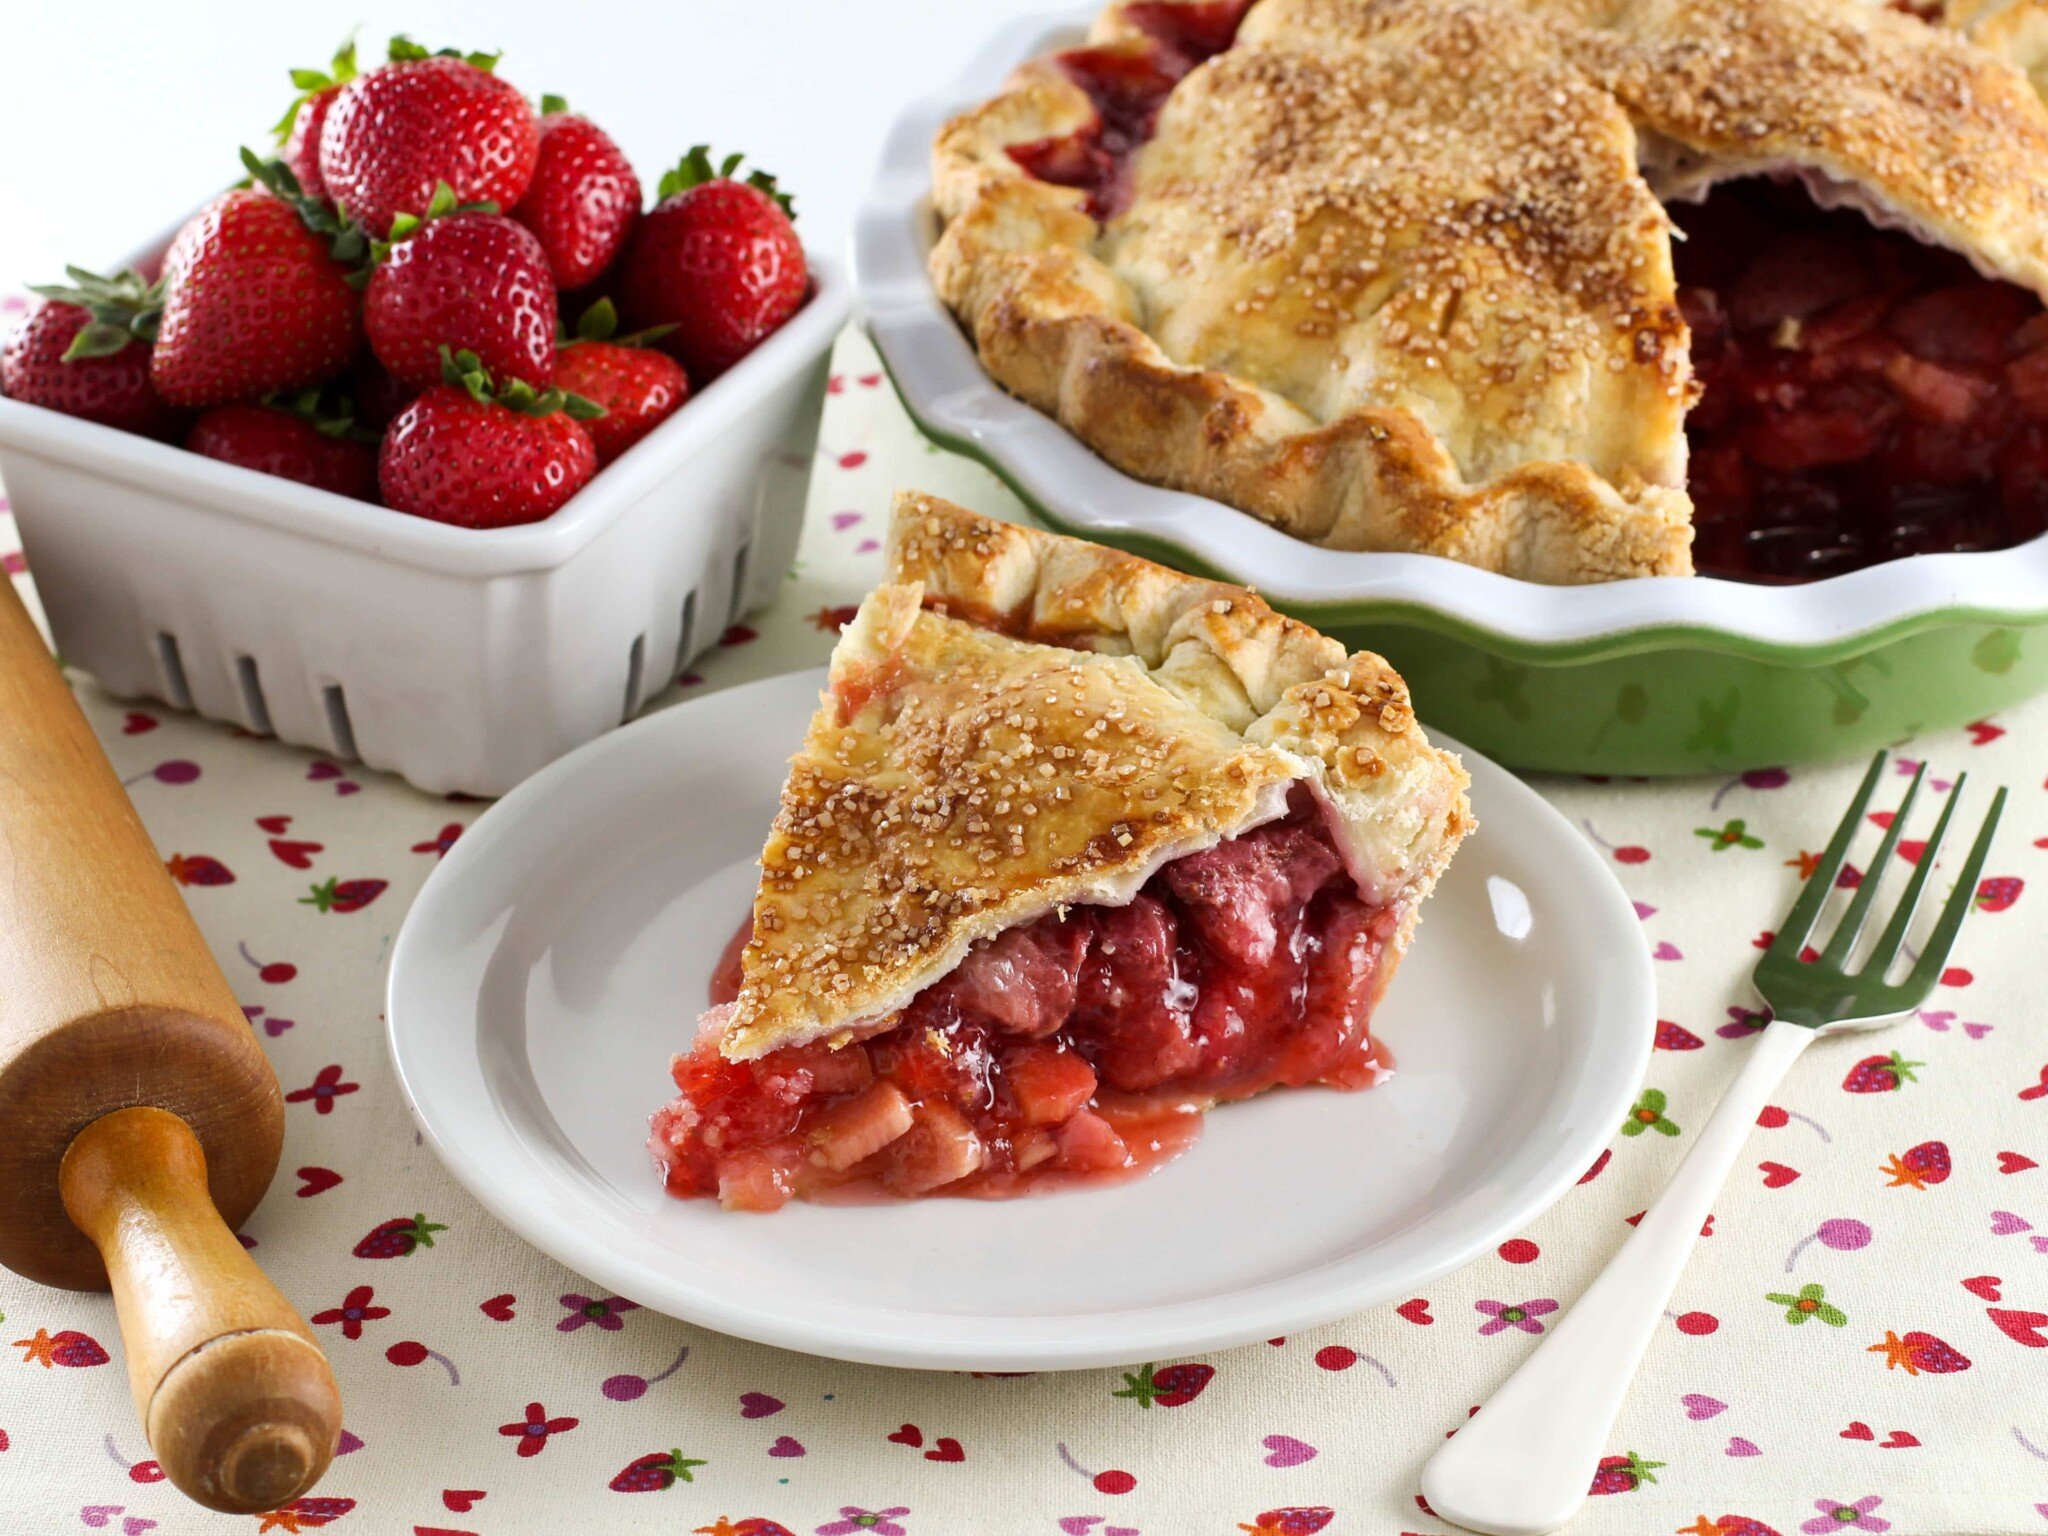 Strawberry Rhubarb Pie - Old fashioned recipe thickened with tapioca. More strawberry, less rhubarb for just the right amount of tartness.